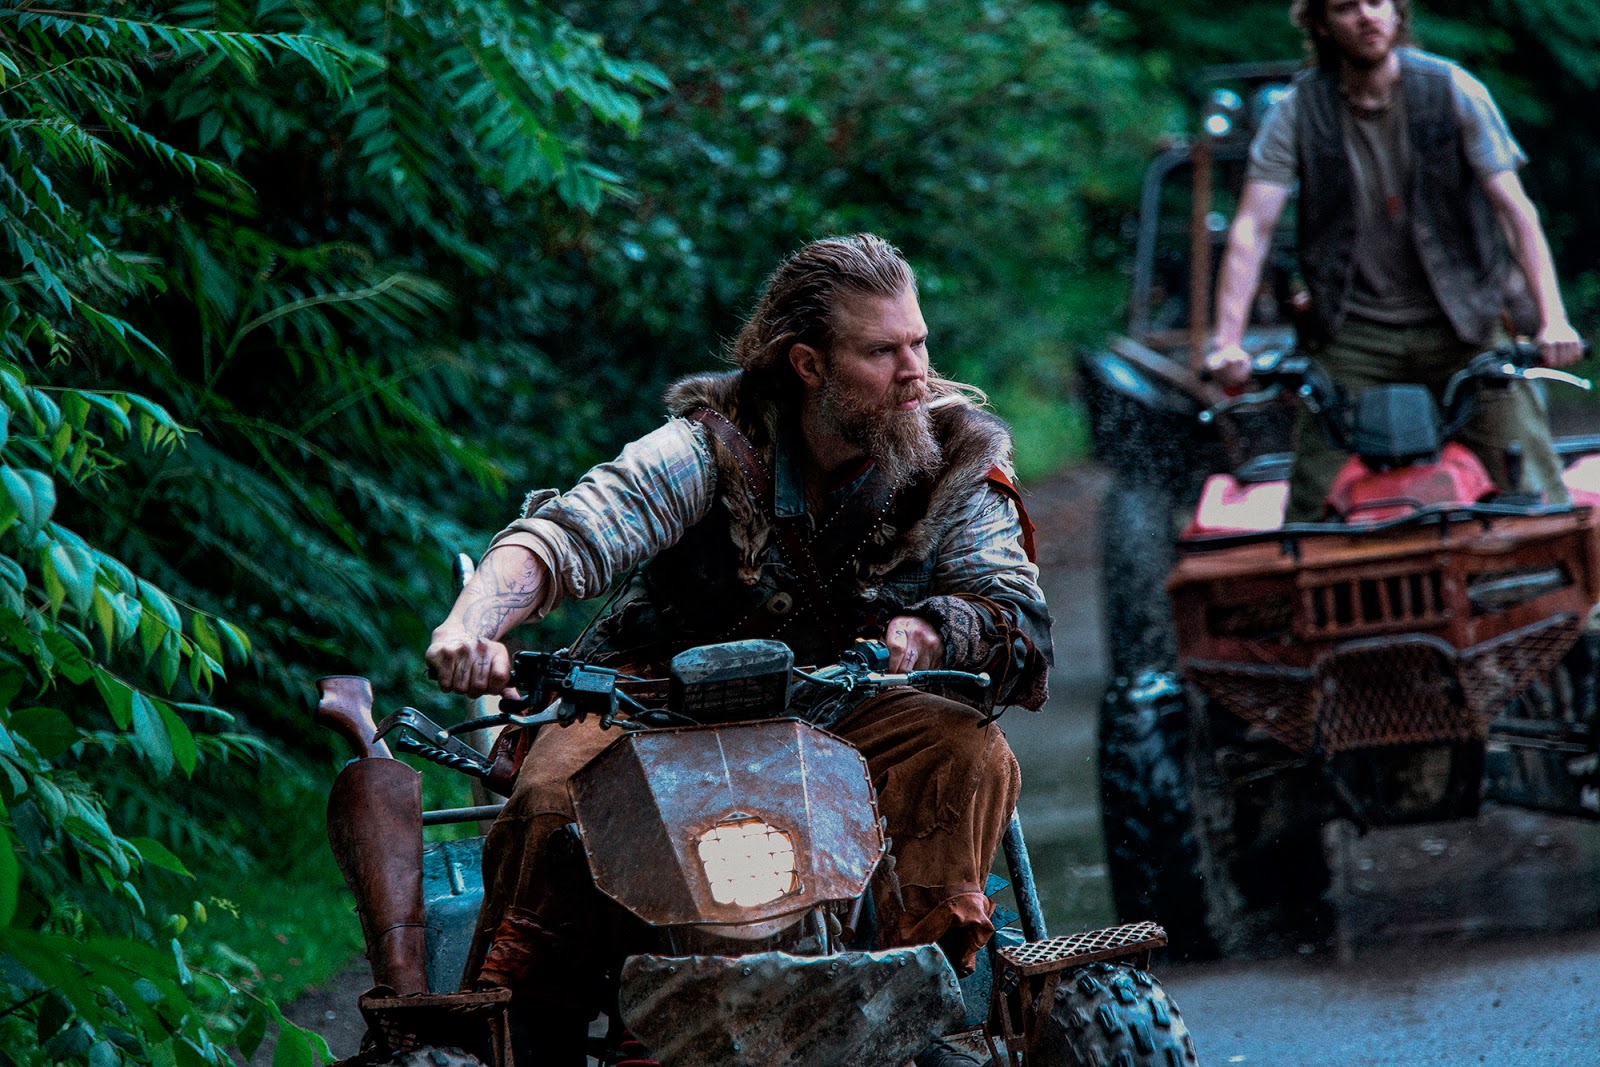 ModwildTV: Outsiders is WGN America's Most Watched Original Series!